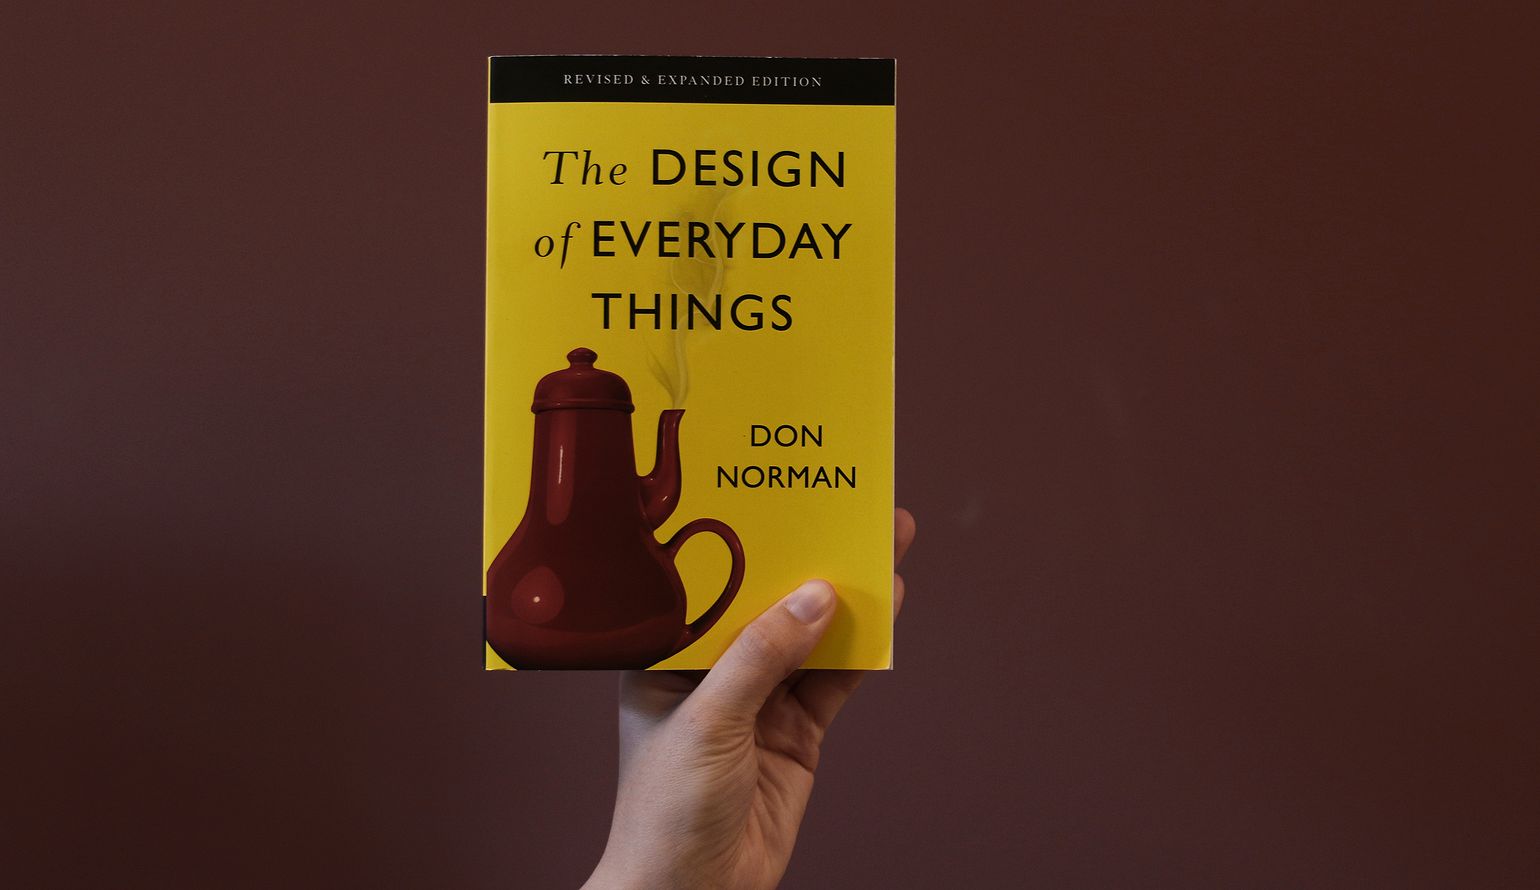 The Design of Everyday Things by Dominique  tookapic